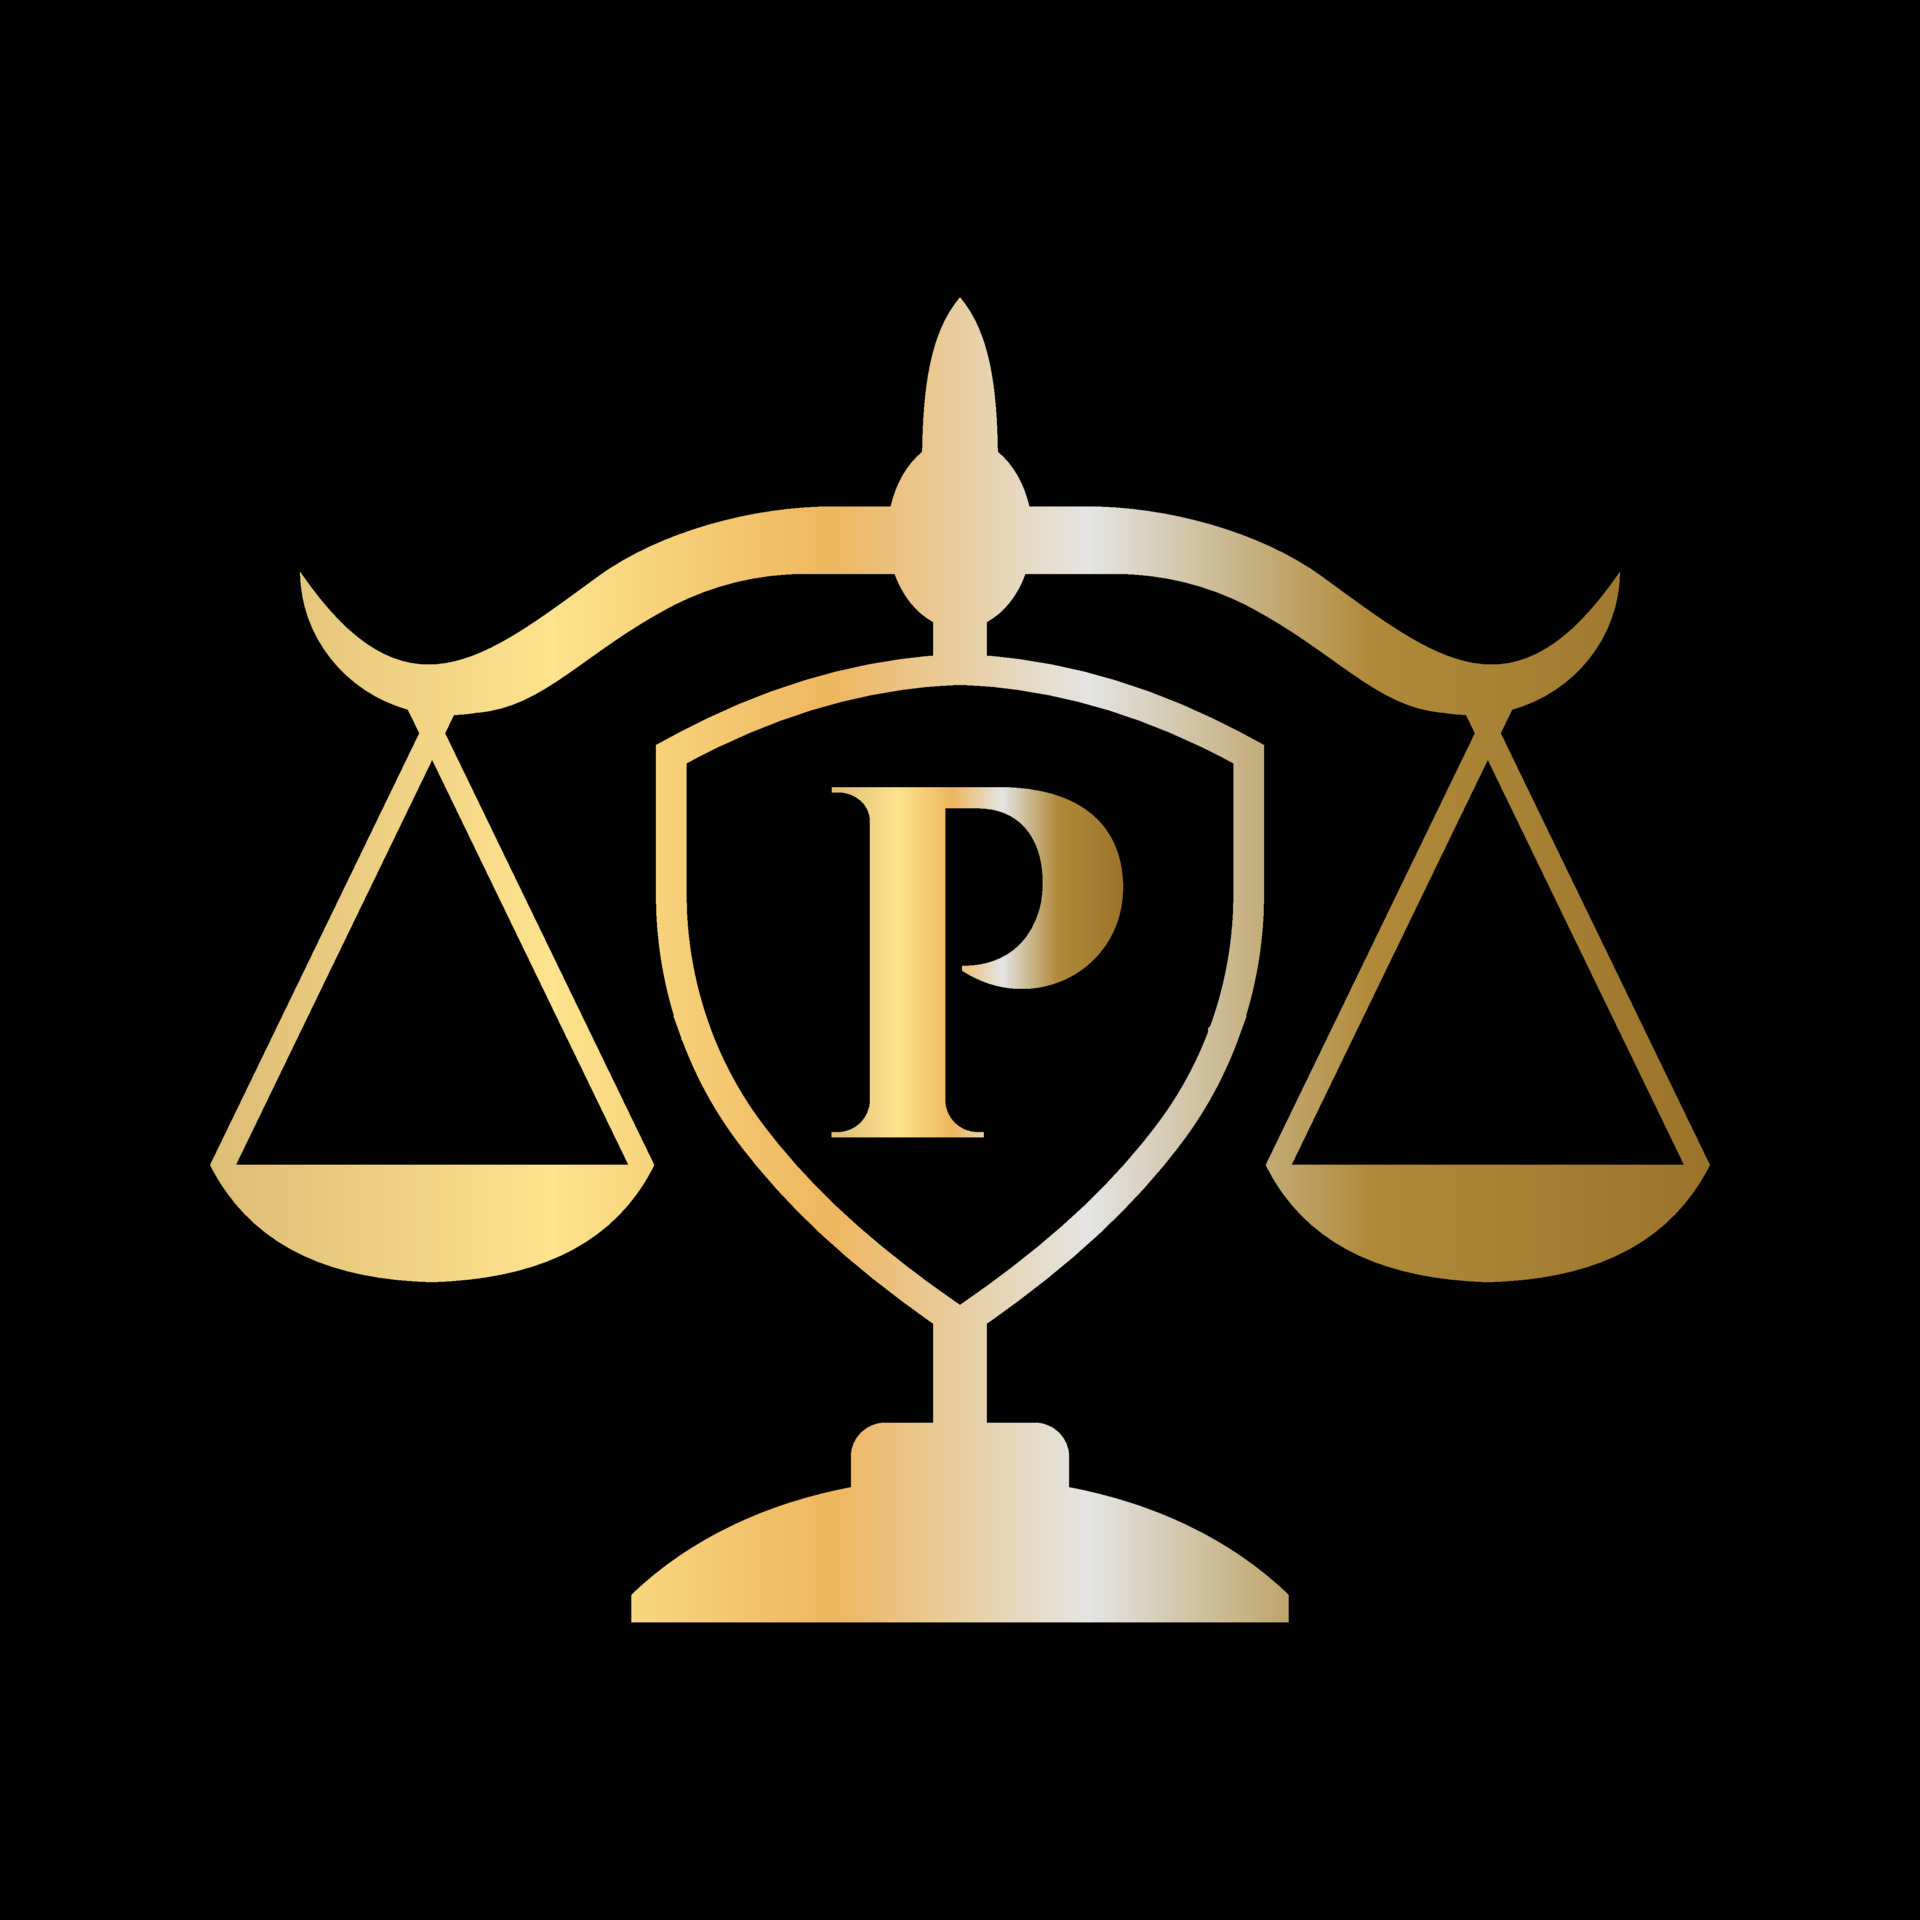 Initial Letter P Law Firm Logo. Legal Logo and Lawyers Concept 17681496 ...